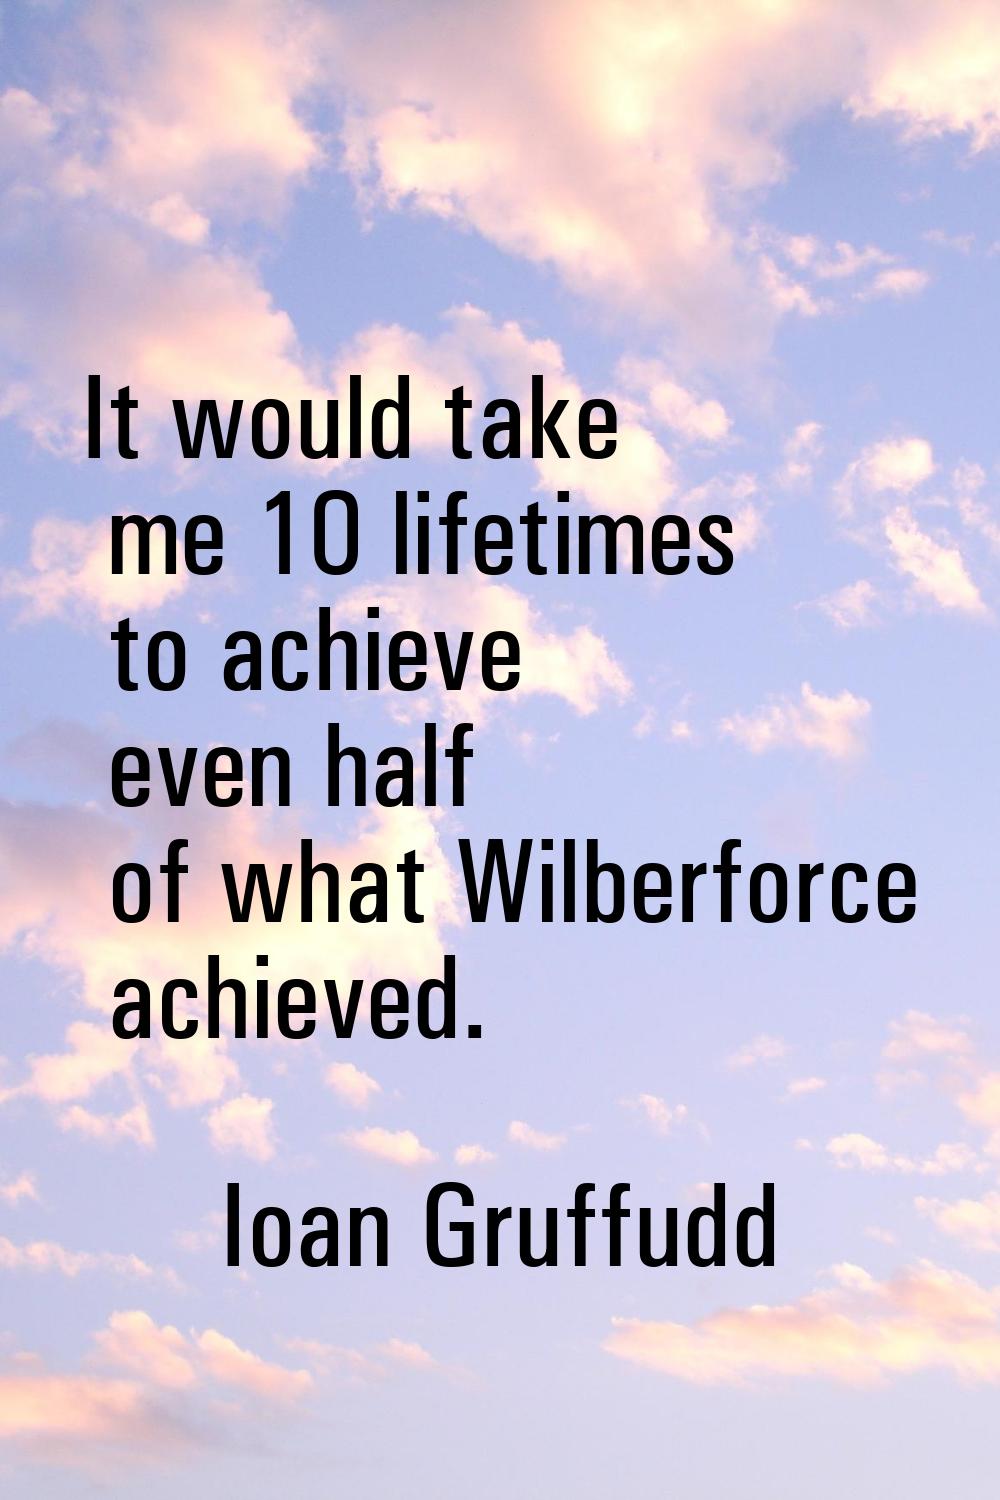 It would take me 10 lifetimes to achieve even half of what Wilberforce achieved.